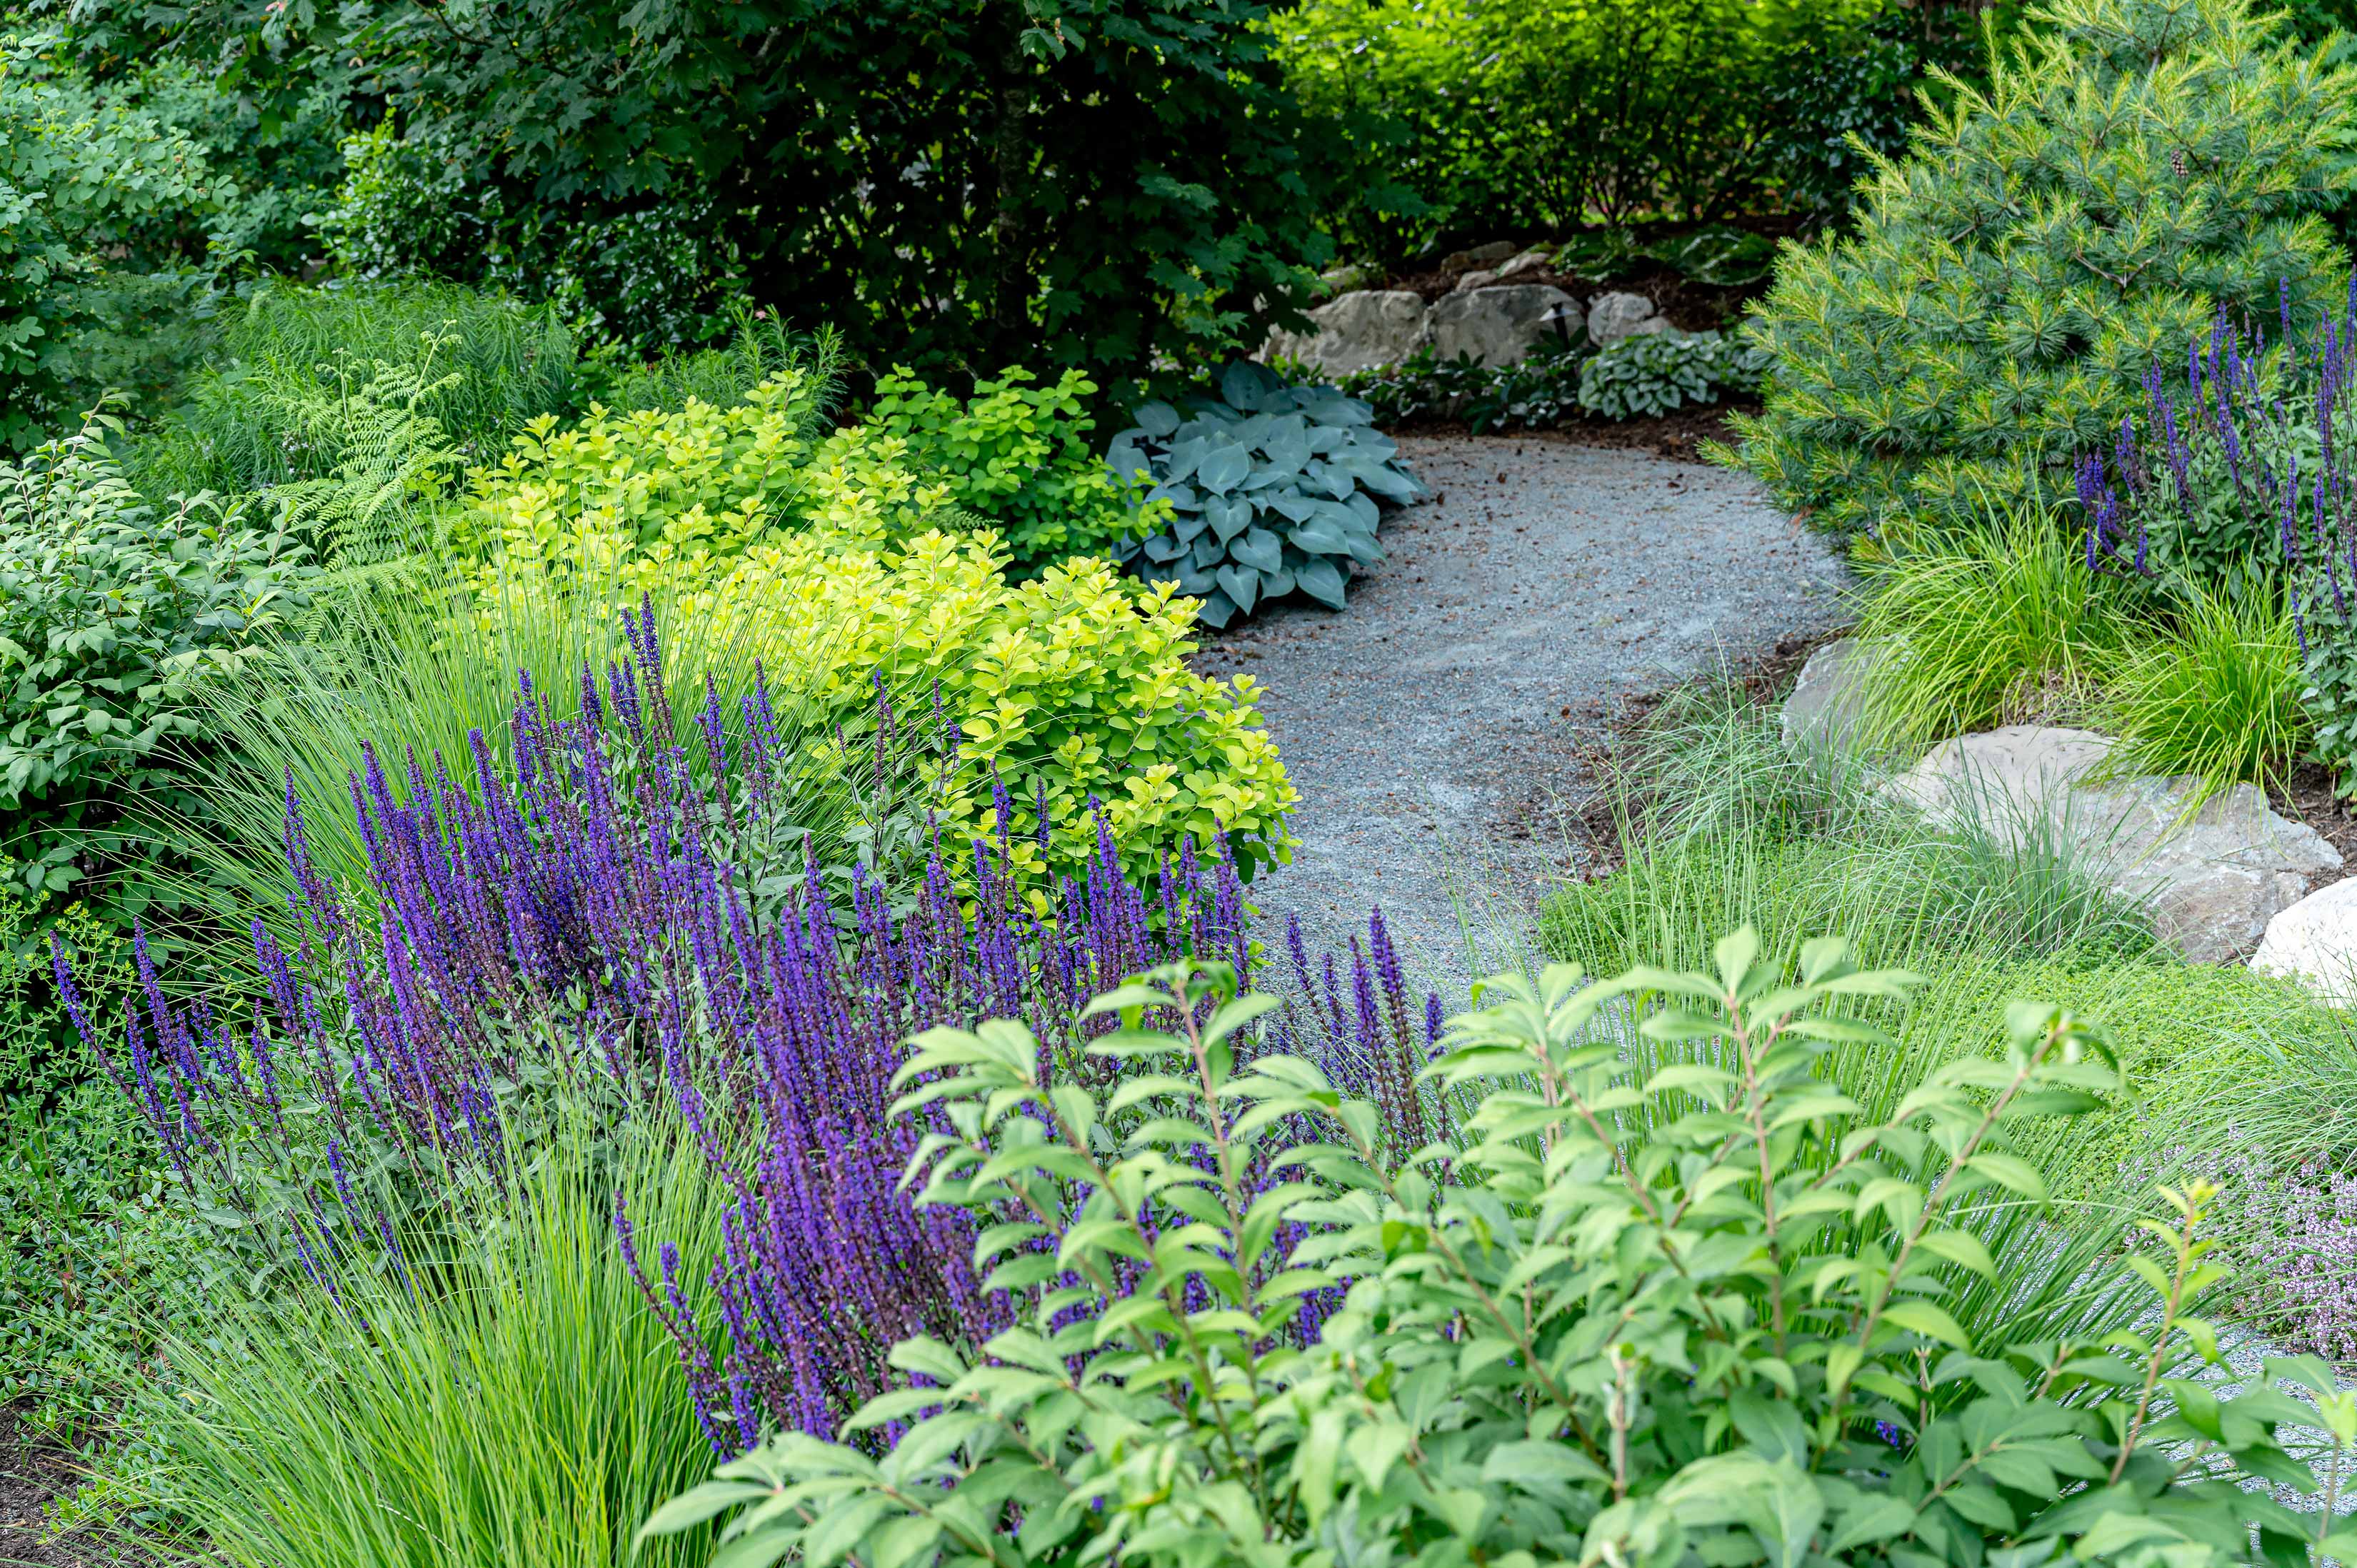 Layered garden of purple and green along a grey walkway.